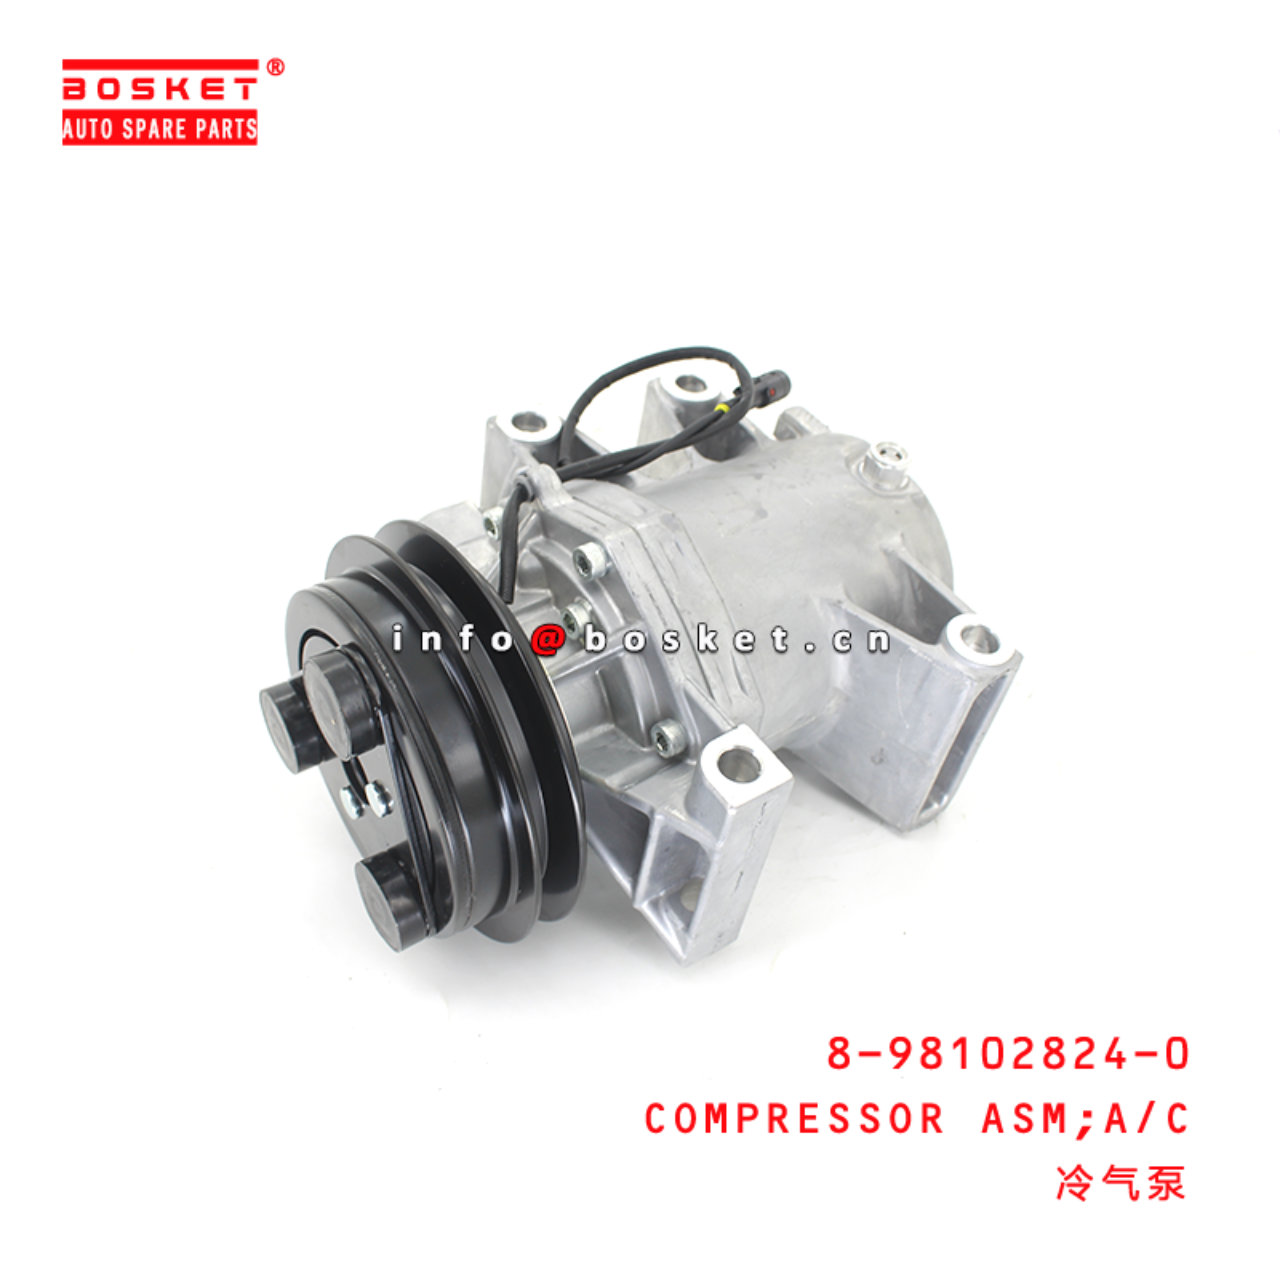 8-98102824-0 Air Compression Compressor Assembly Suitable for 